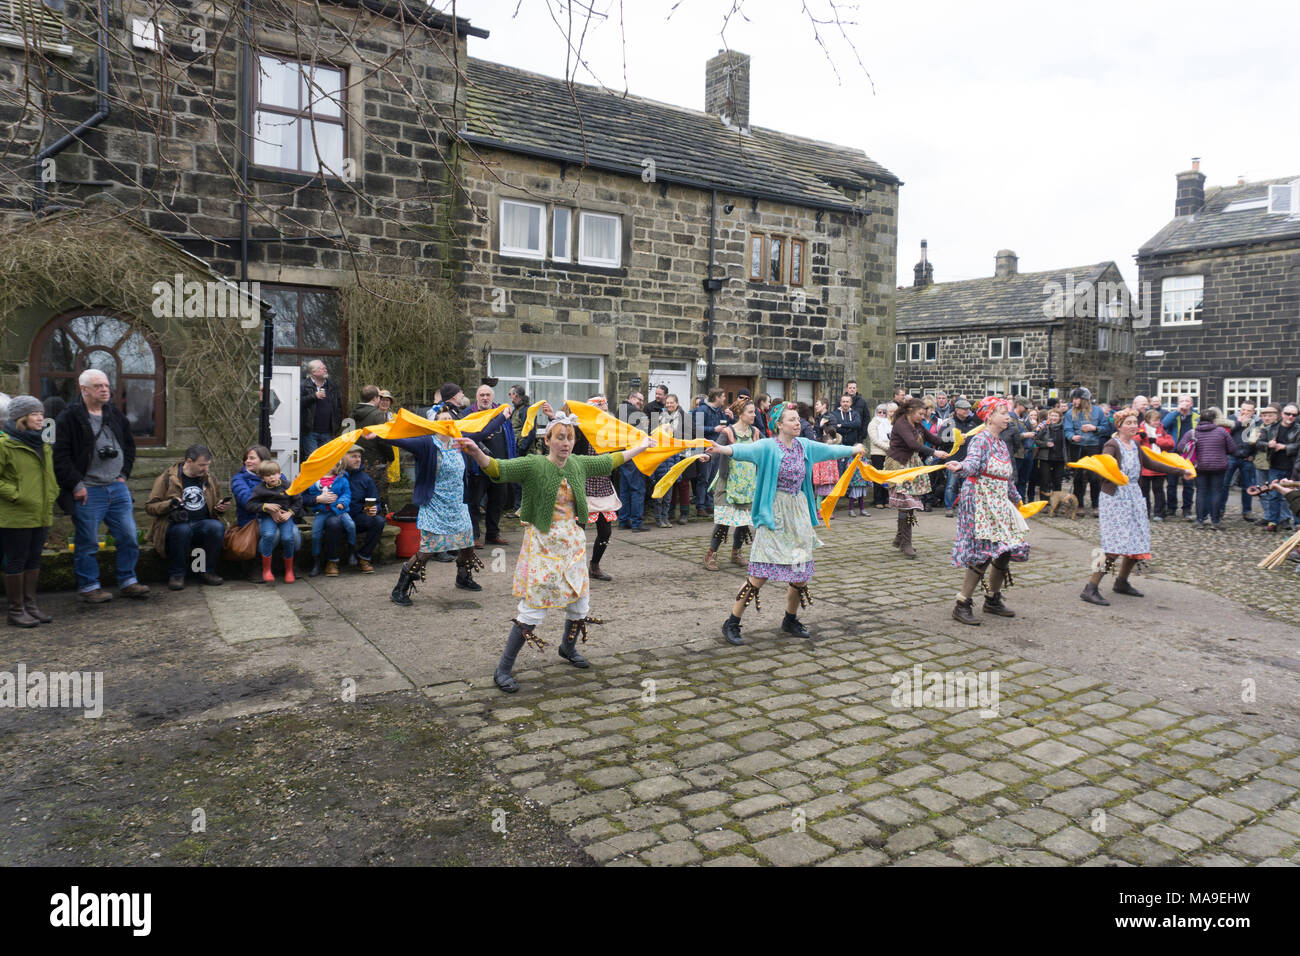 Heptonstall, UK. 30th March, 2018. Prior to the PACE EGG Play a  'Traditional ' Yorkshire dance of the Washerwomen ! A traditional Pace Egg play is performed in Heptonstall’s Weavers Square on Good Fridays, attracting hundreds of visitors to the village. Credit: Steve Morgan/Alamy Live News Stock Photo